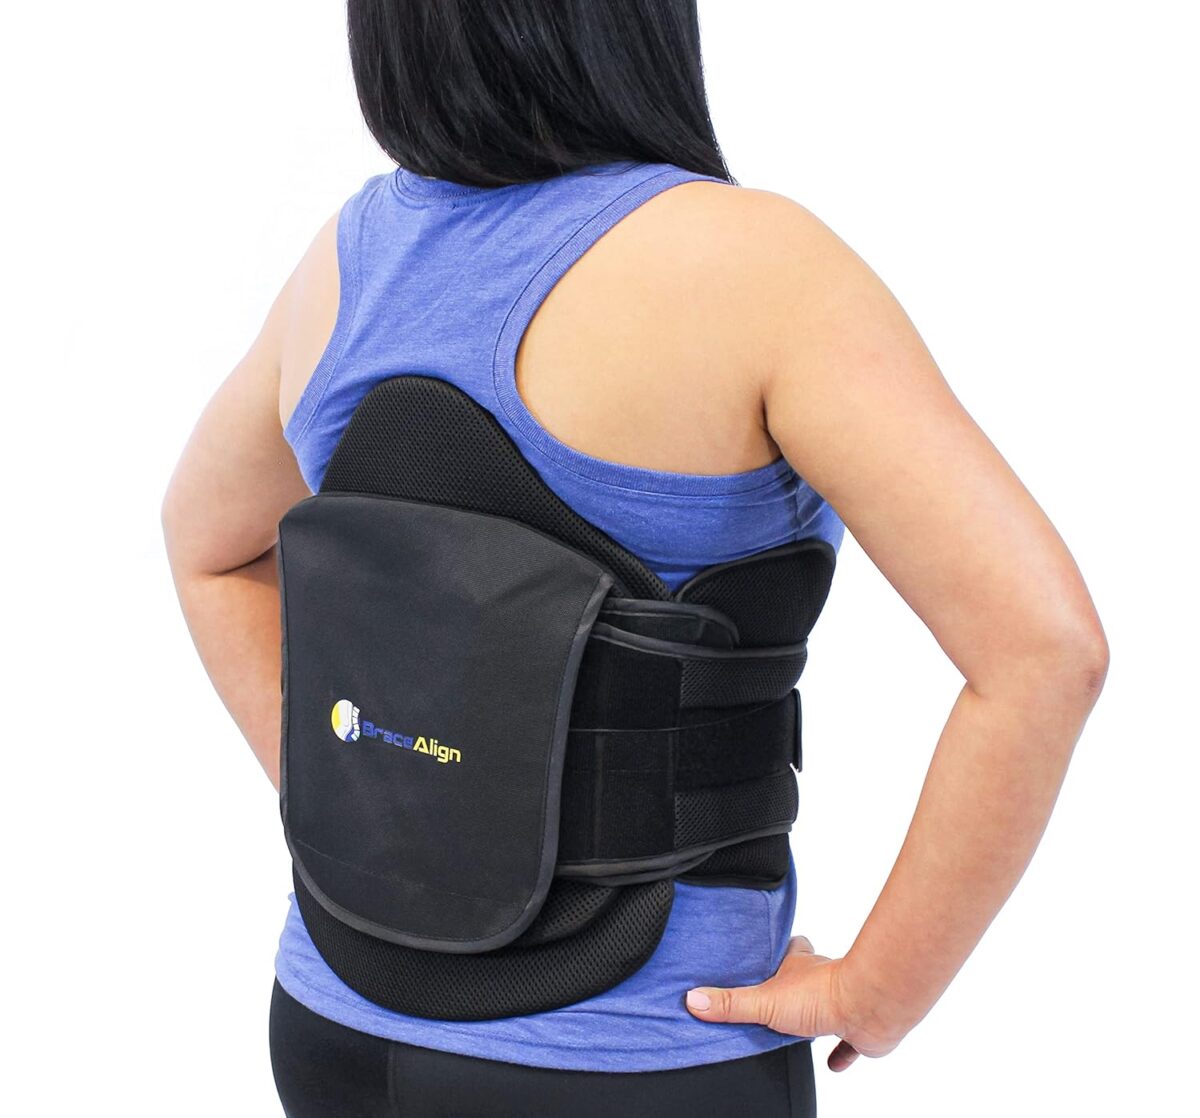 Featured Image for Brace Align VertebrAlign LSO Medical Lower Back Brace L0650 L0637 – Recovery and Pain Relief for Herniated, Bulging, Slipped Disc, Sciatica, DDD, Spine Stenosis, Fractures, and Lumbar Support